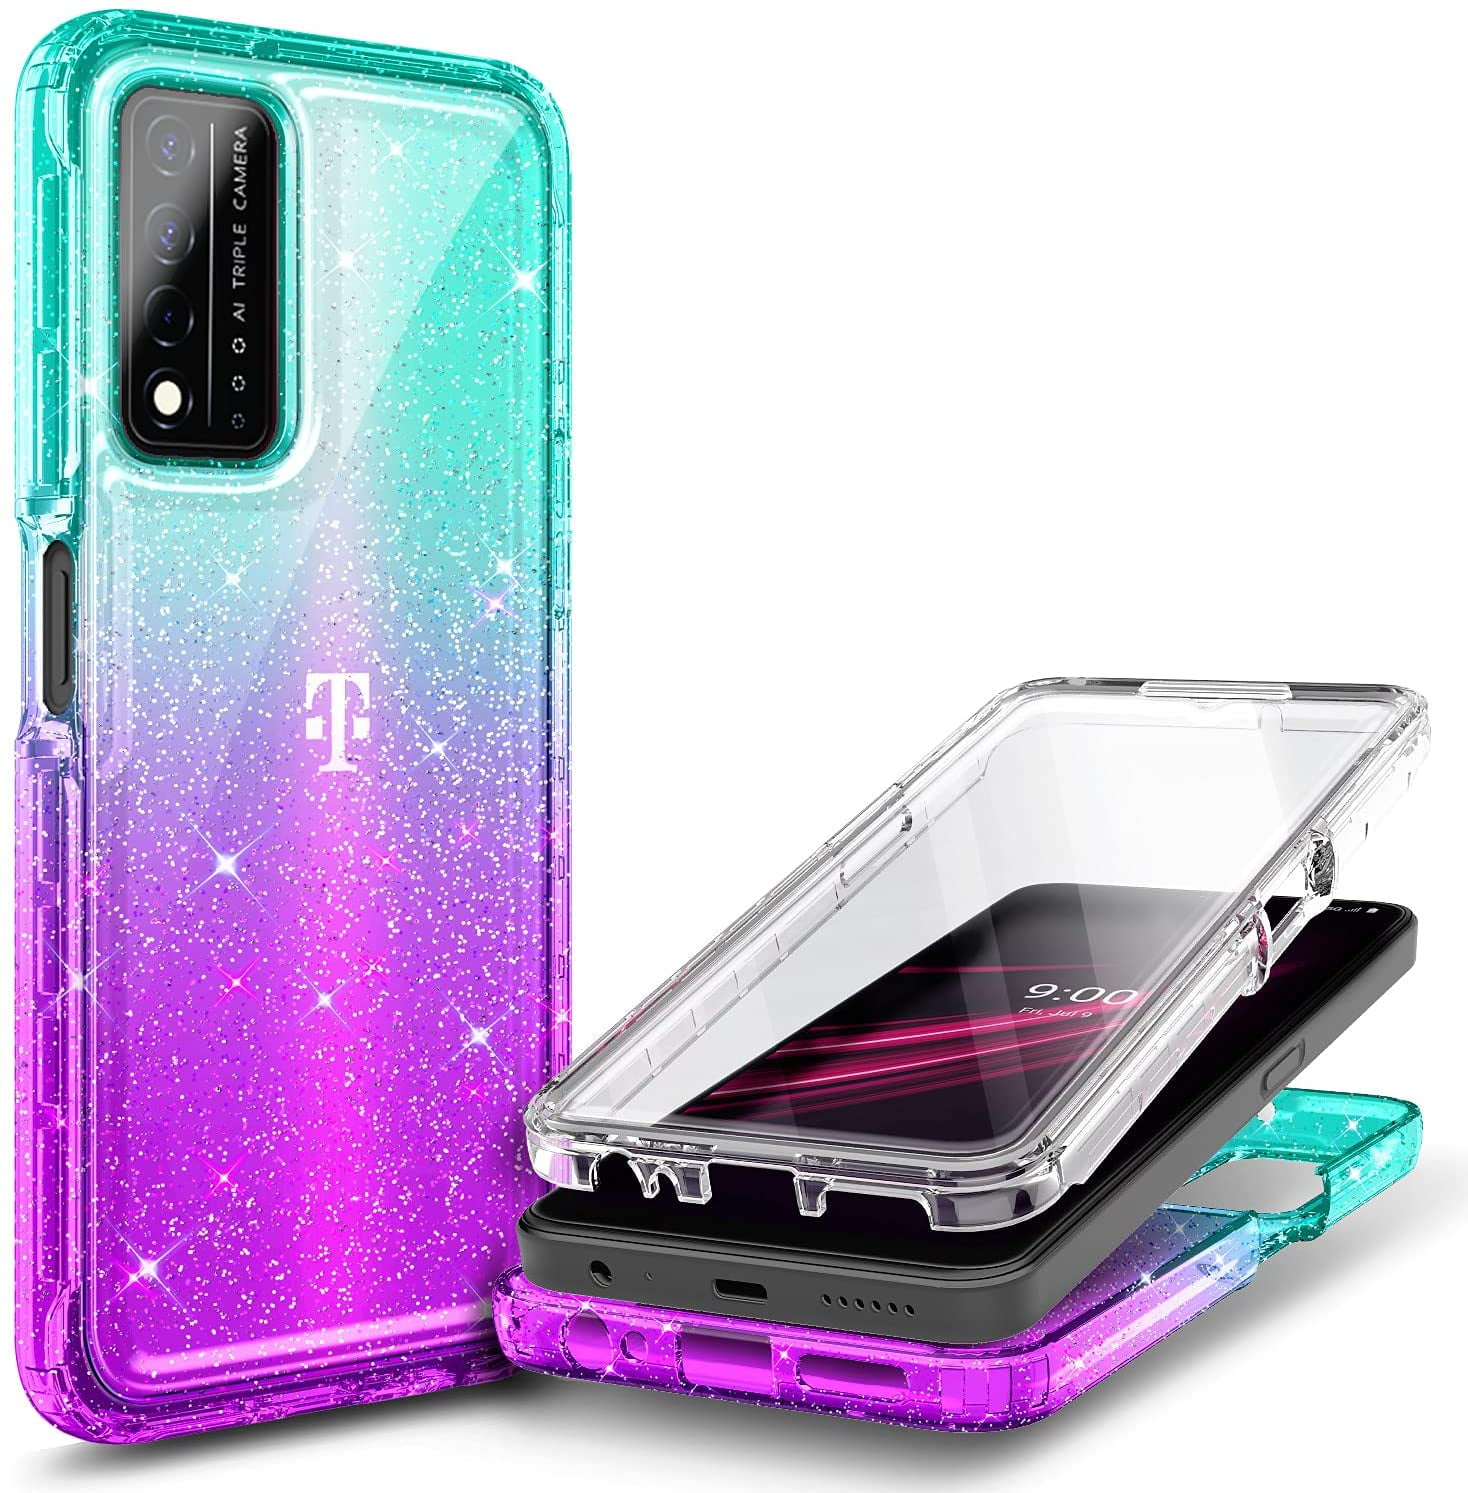 Built-in Screen Protector NZND Motorola Moto G Play 2021 Case with Glitter Pink/Aqua Impact Resist Durable Phone Case Full-Body Protective Shockproof Rugged Bumper Cover 